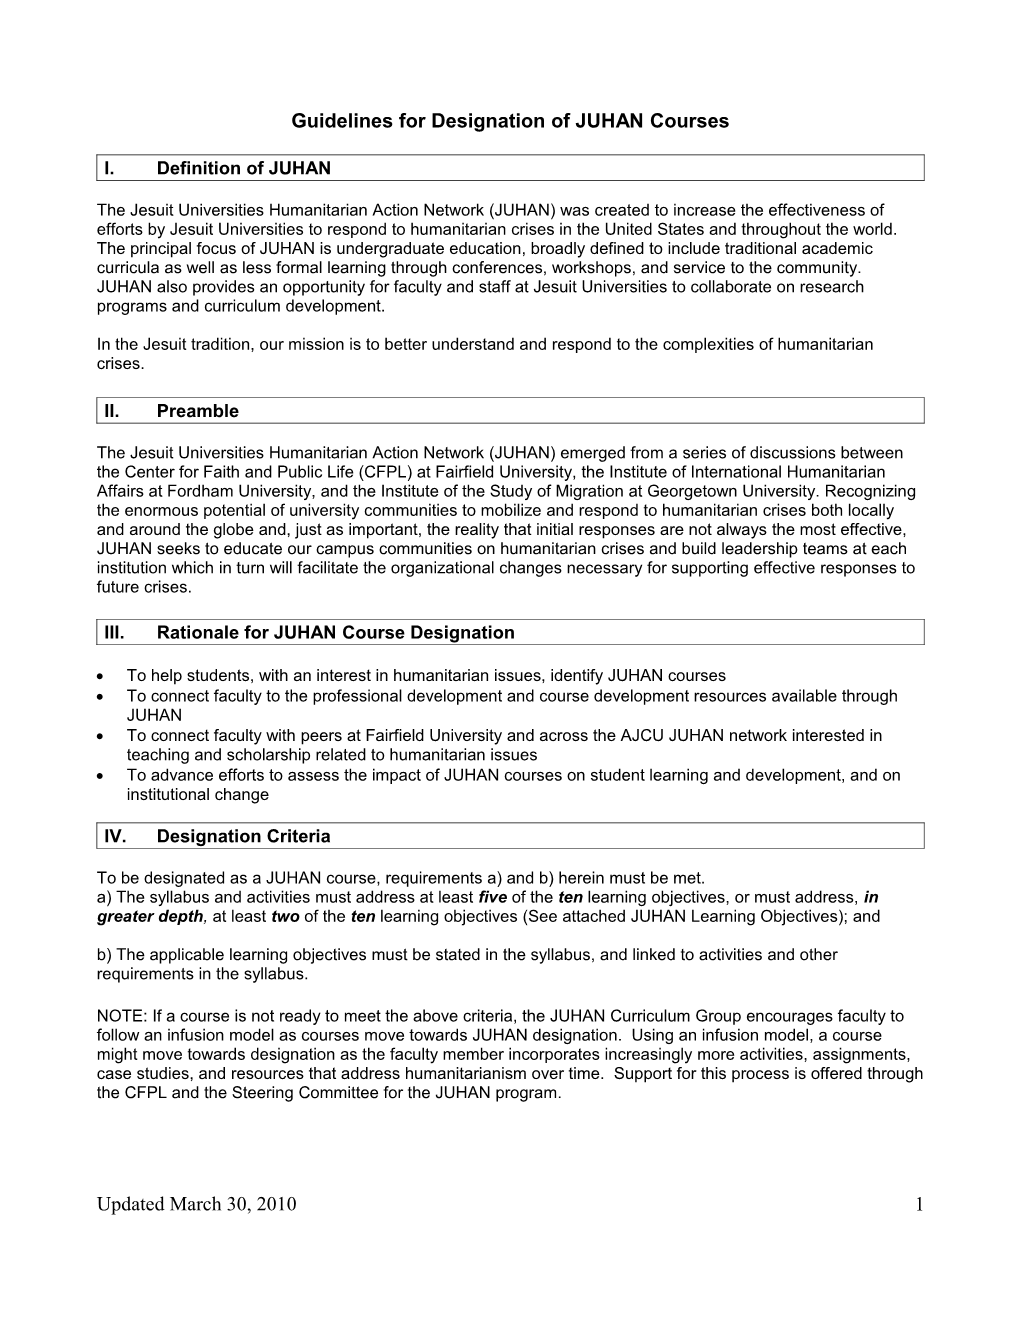 Guidelines and Criteria for Designation of a Service Learning Course